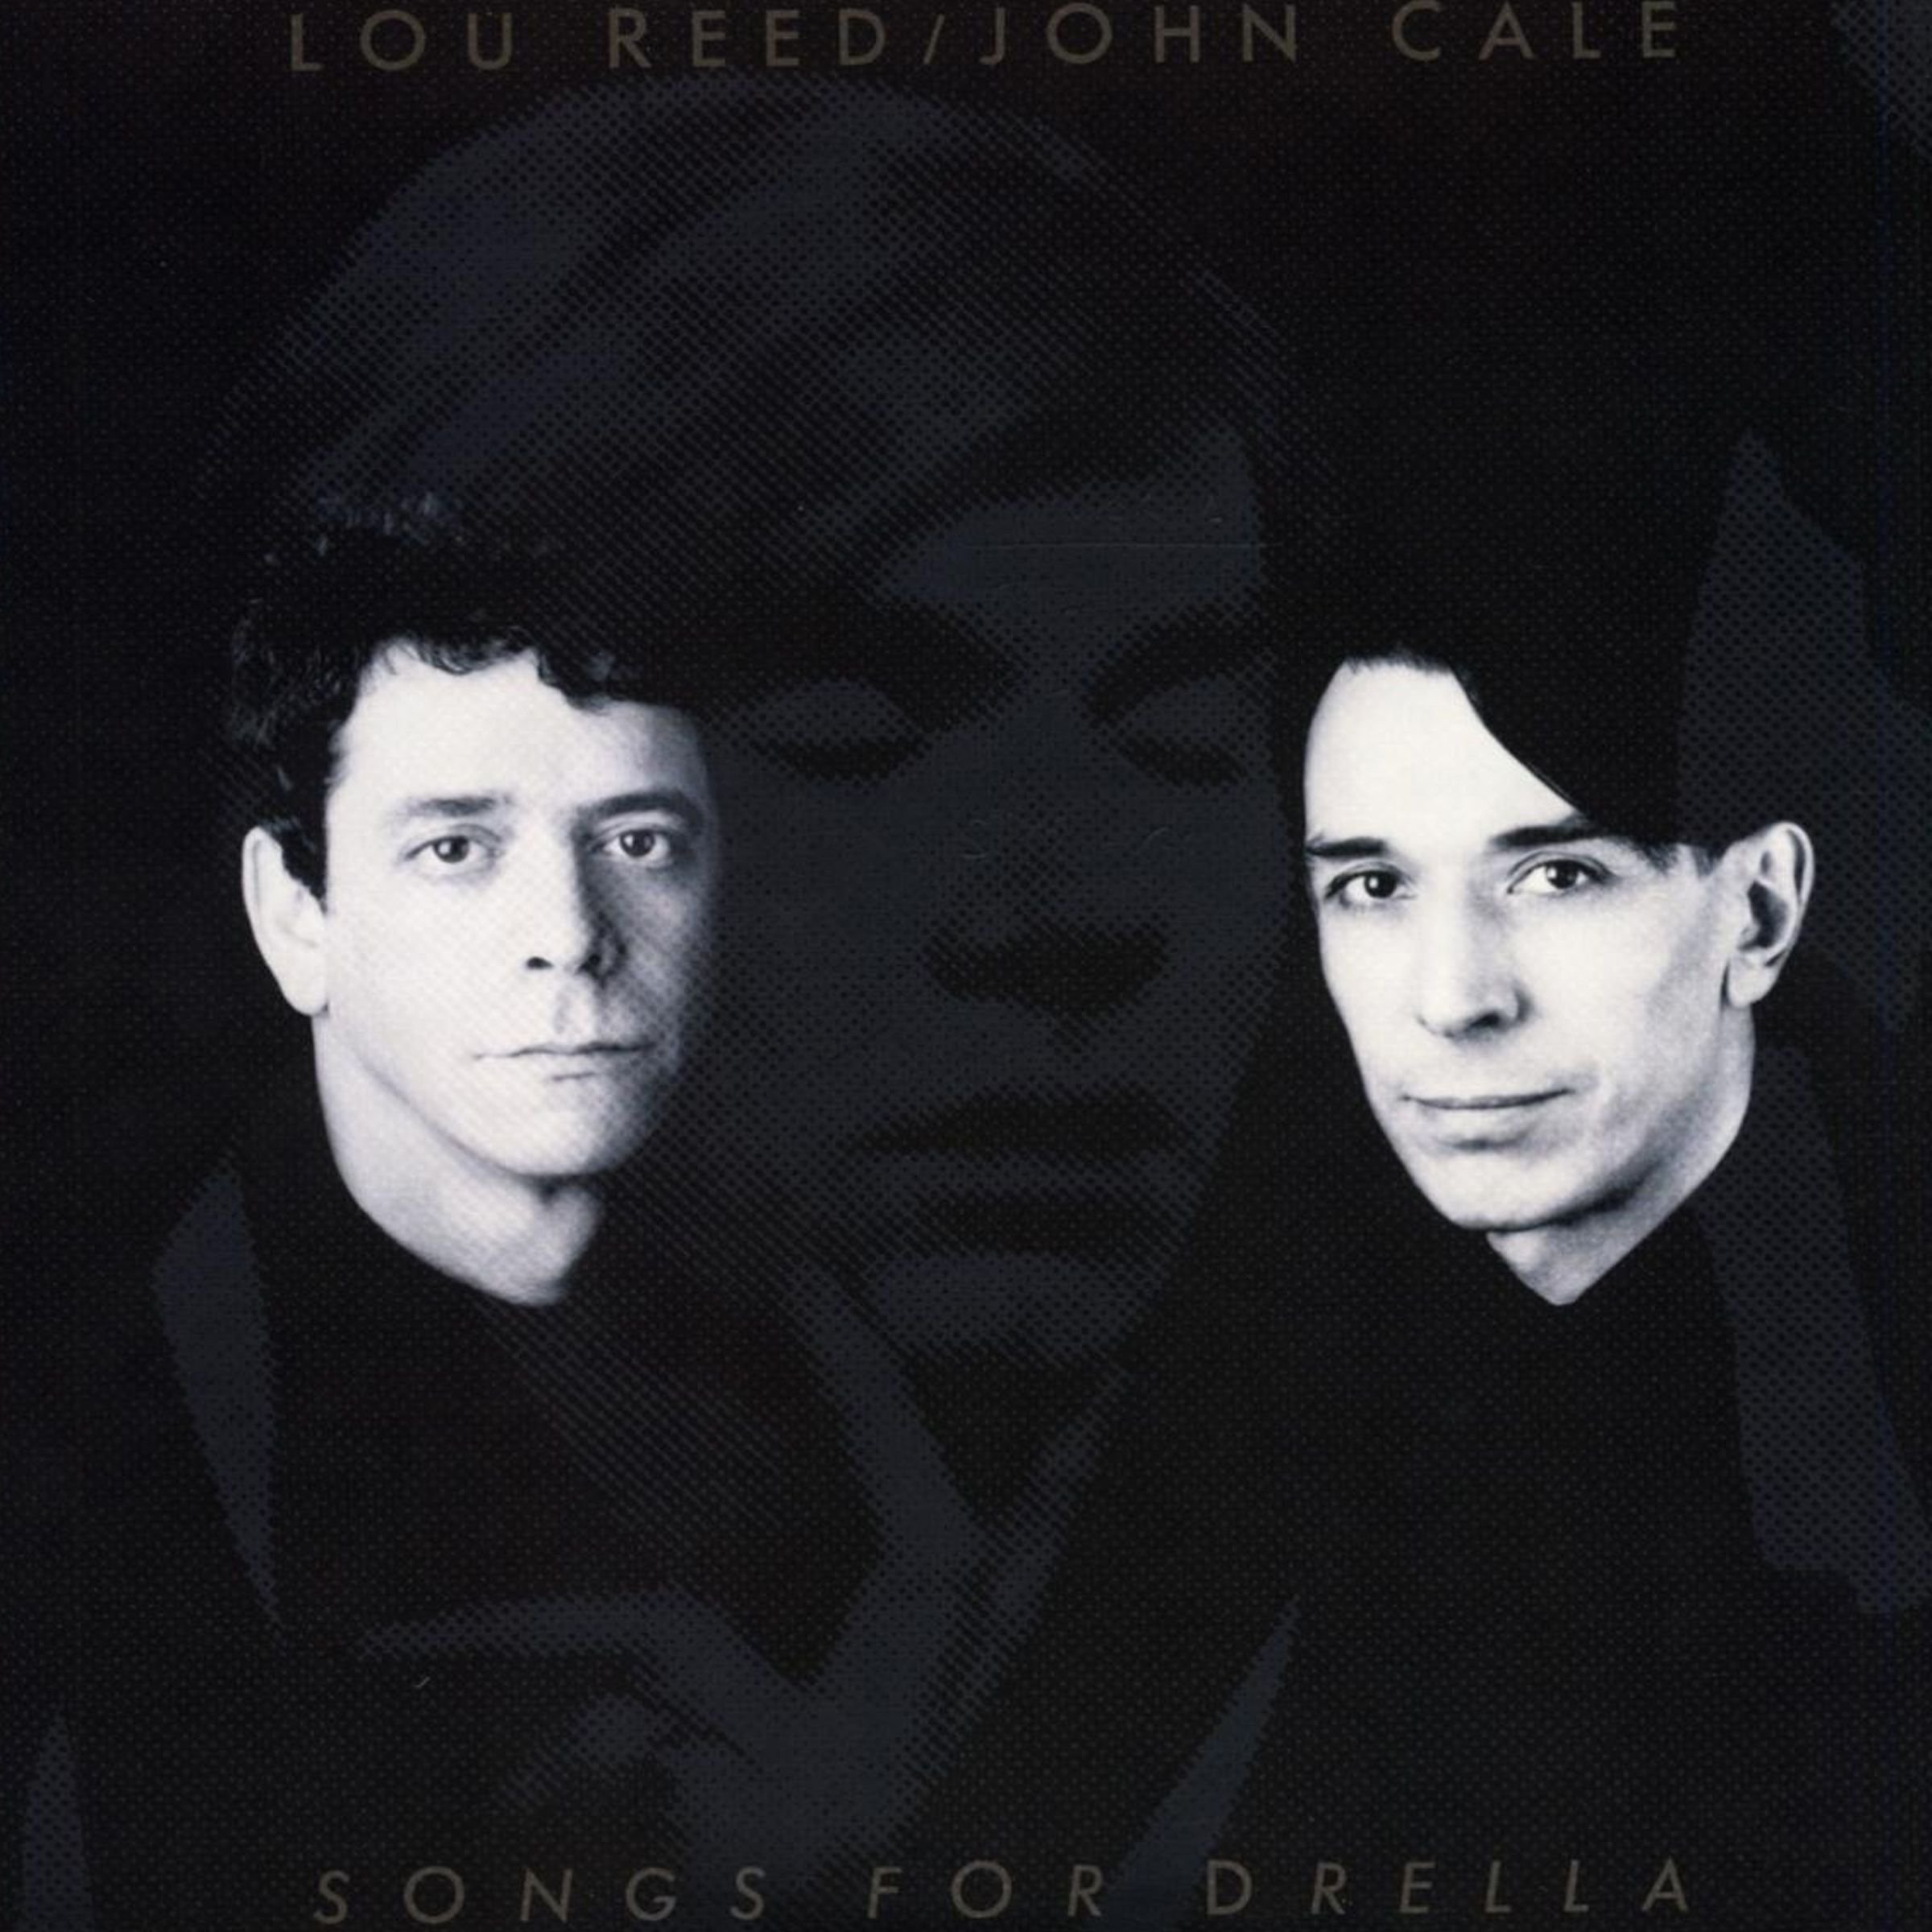 Lou Reed and John Cale-Songs For Drella-24-96-WEB-FLAC-REMASTERED-2015-OBZEN